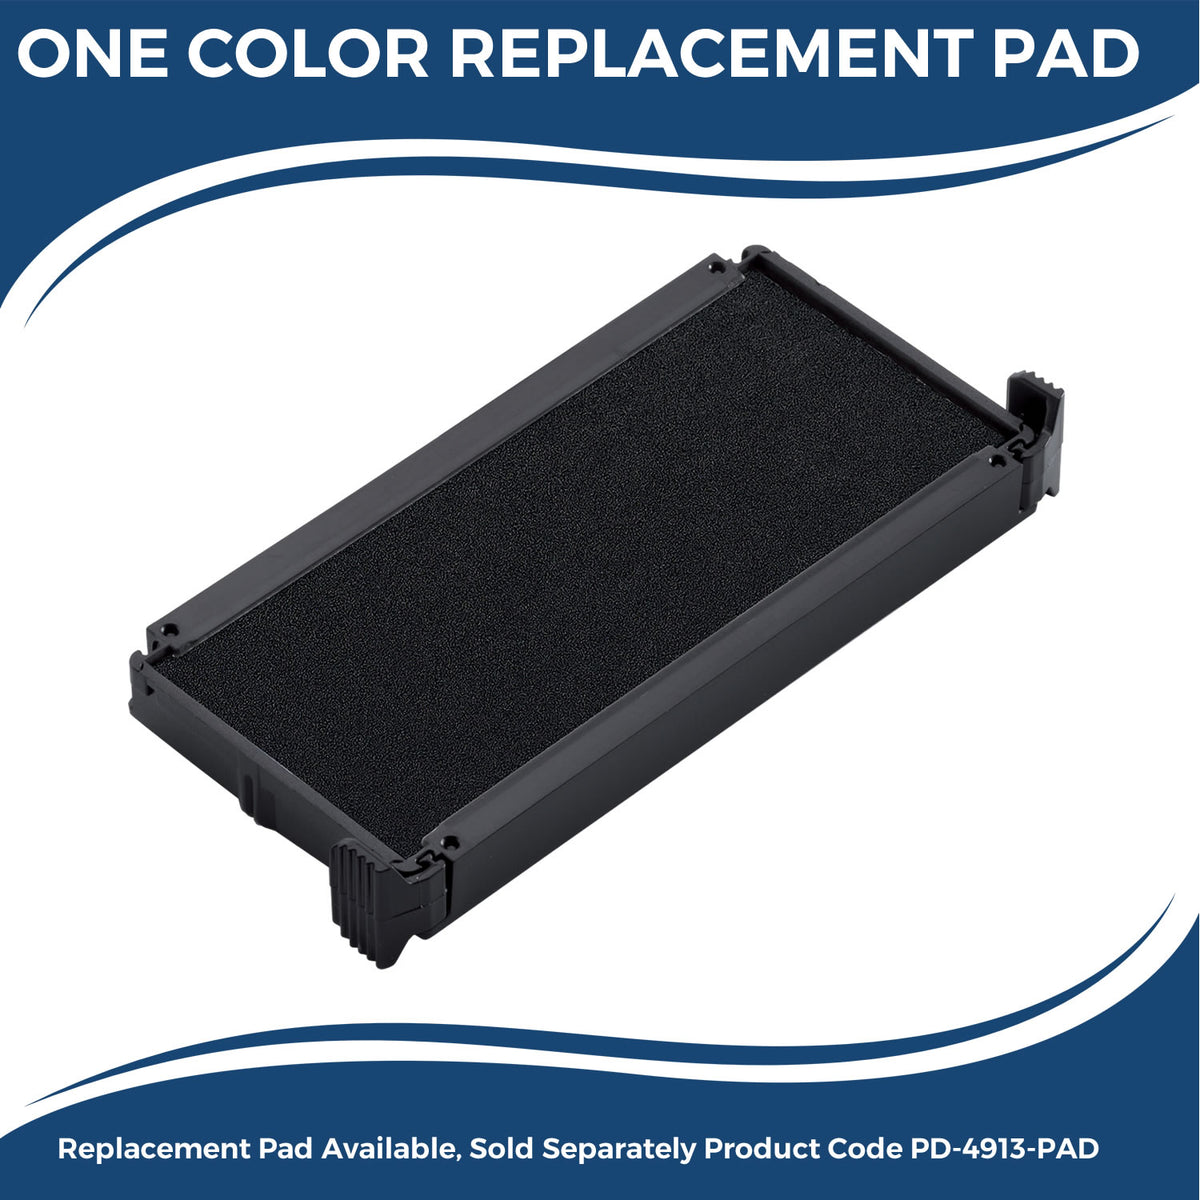 Large Self-Inking Covid-19 Test Pending Stamp 4992S Large Replacment Pad